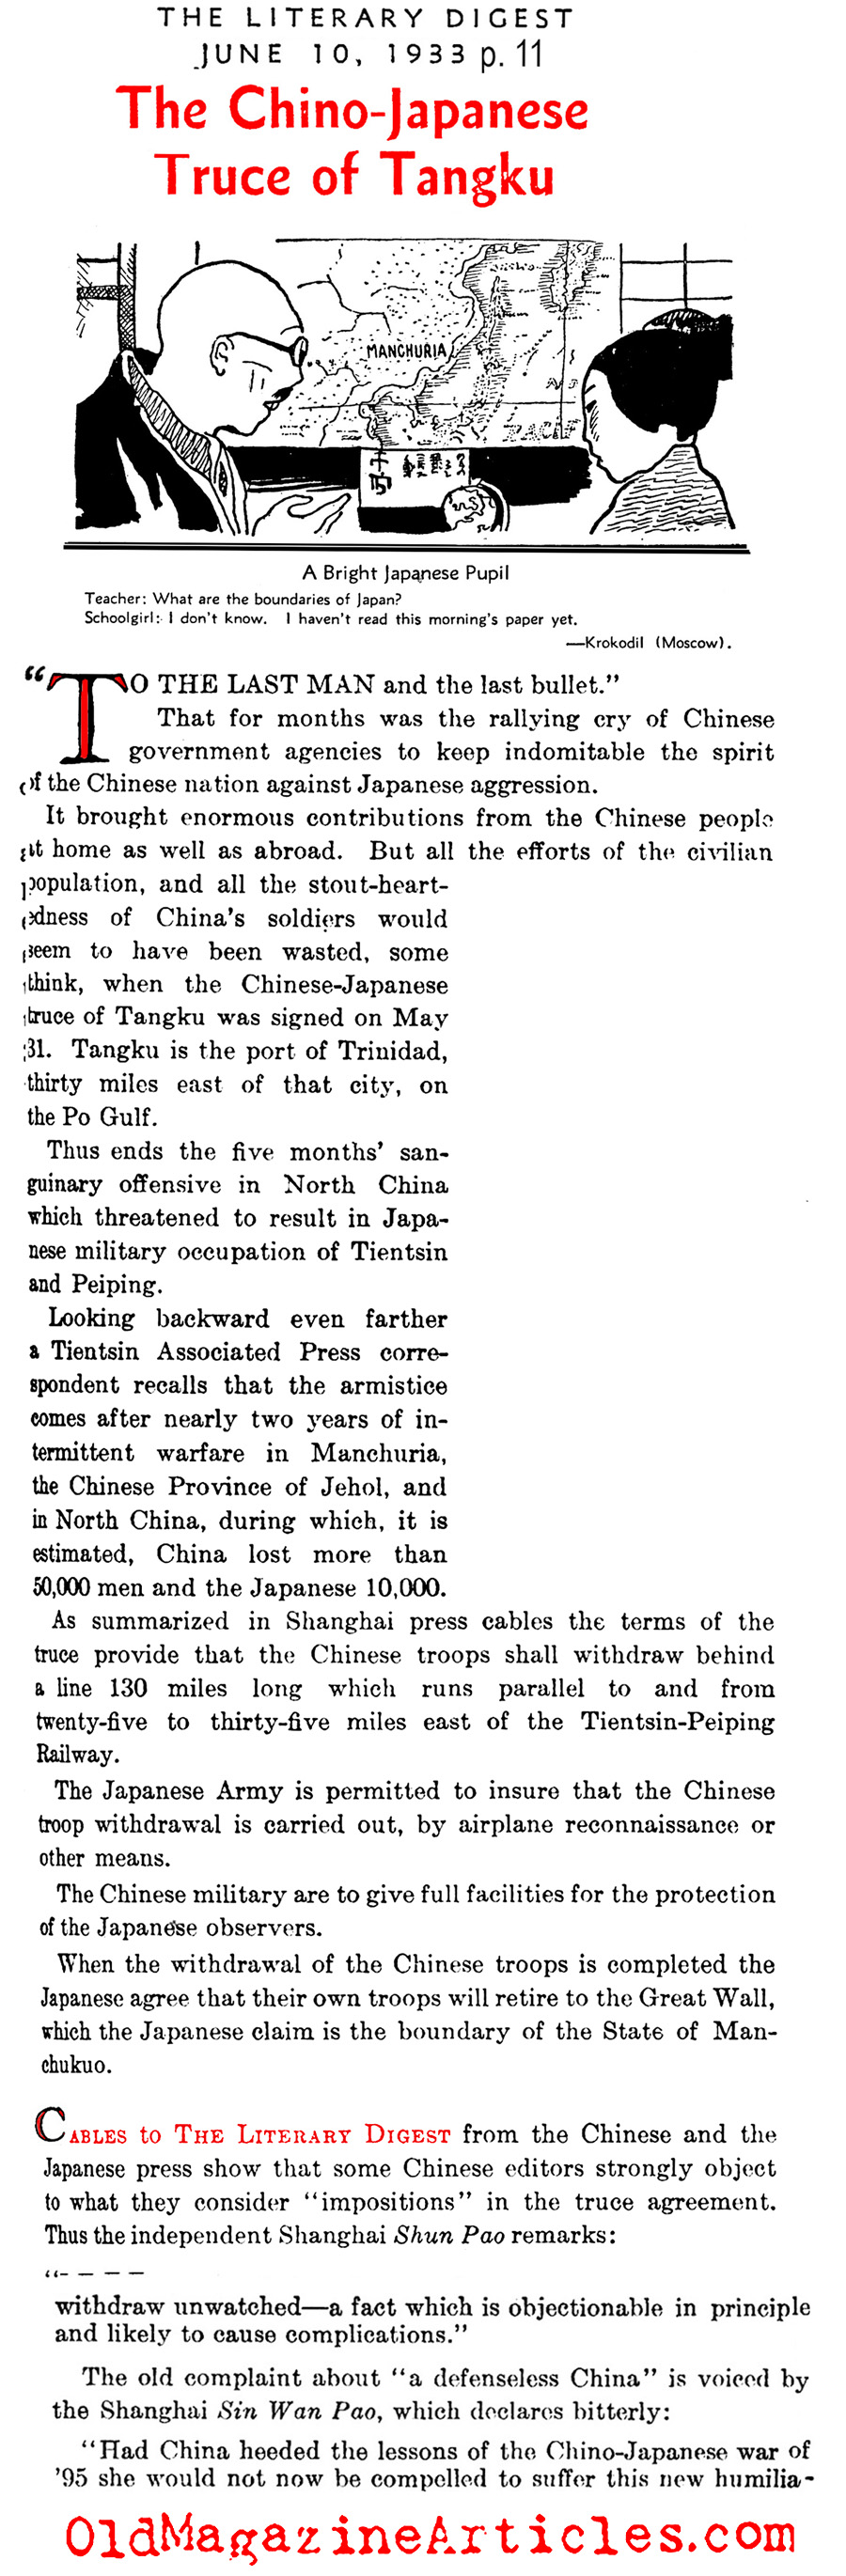 The Truce of Tangku (The Literary Digest, 1933)